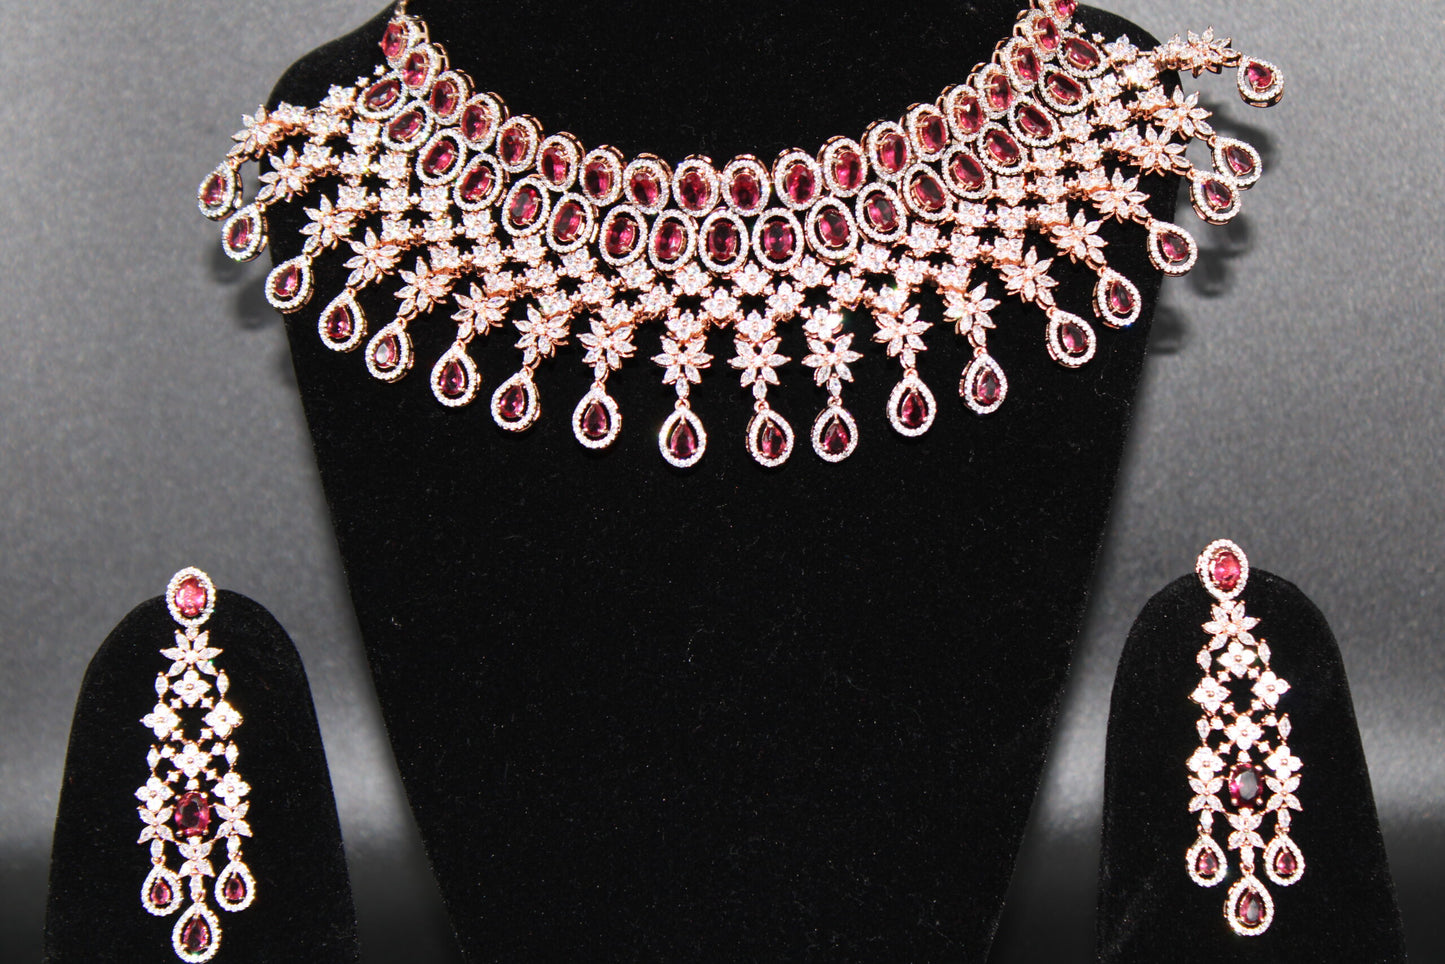 American diamond bridal necklace set with earrings